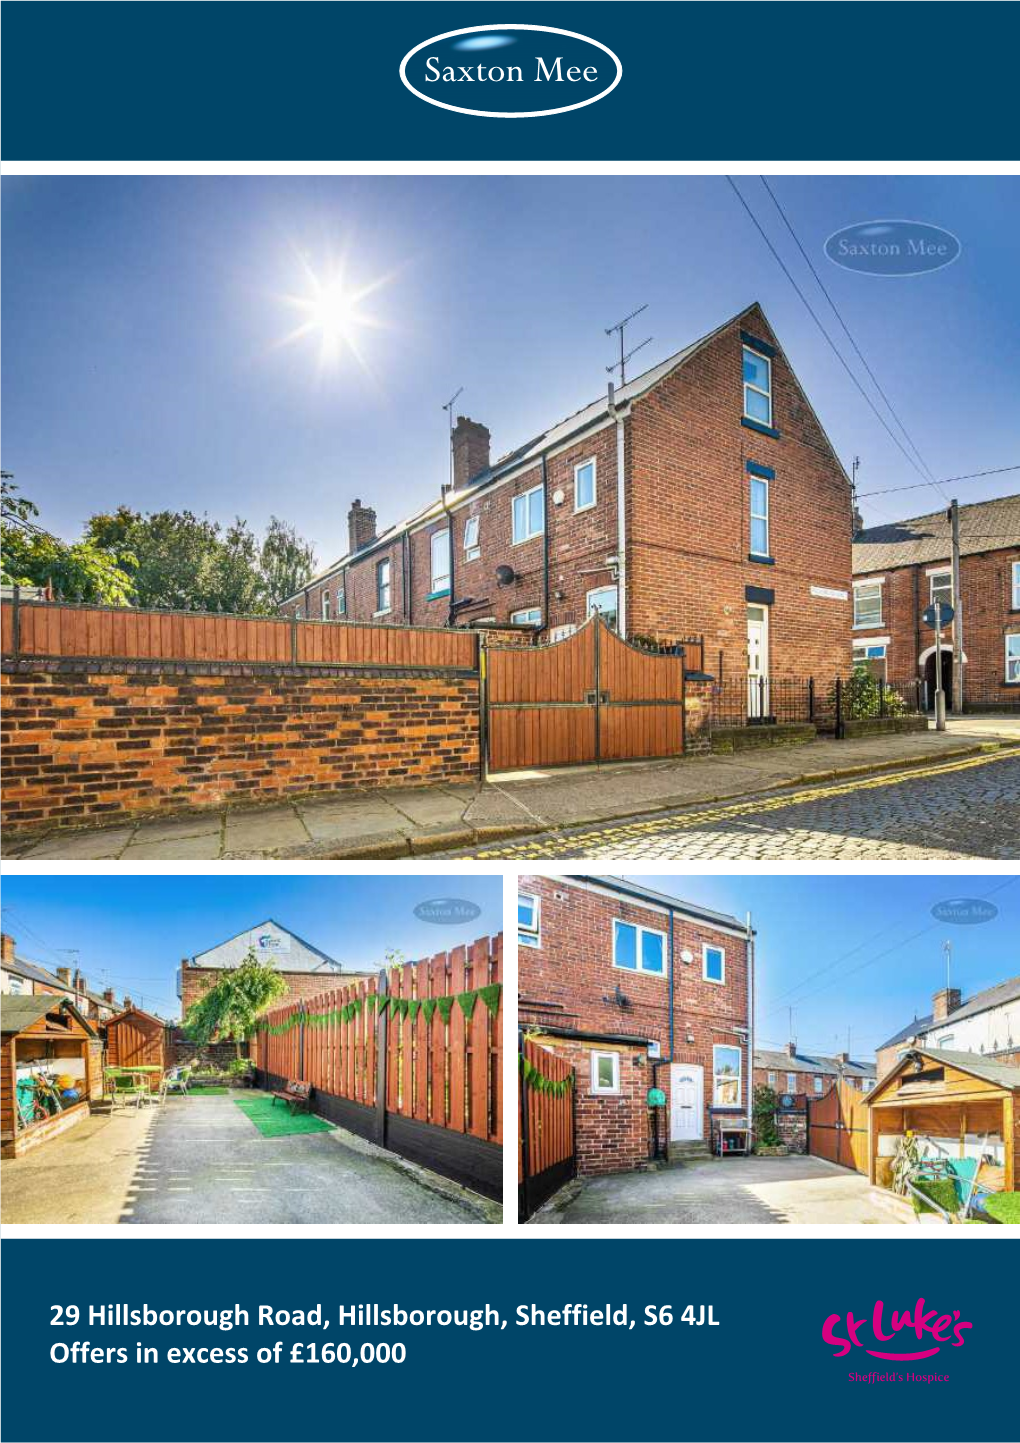 29 Hillsborough Road, Hillsborough, Sheffield, S6 4JL Offers in Excess of £160,000 She Ield’S Hospice 29 Hillsborough Road Hillsborough Offers in Excess of £160,000